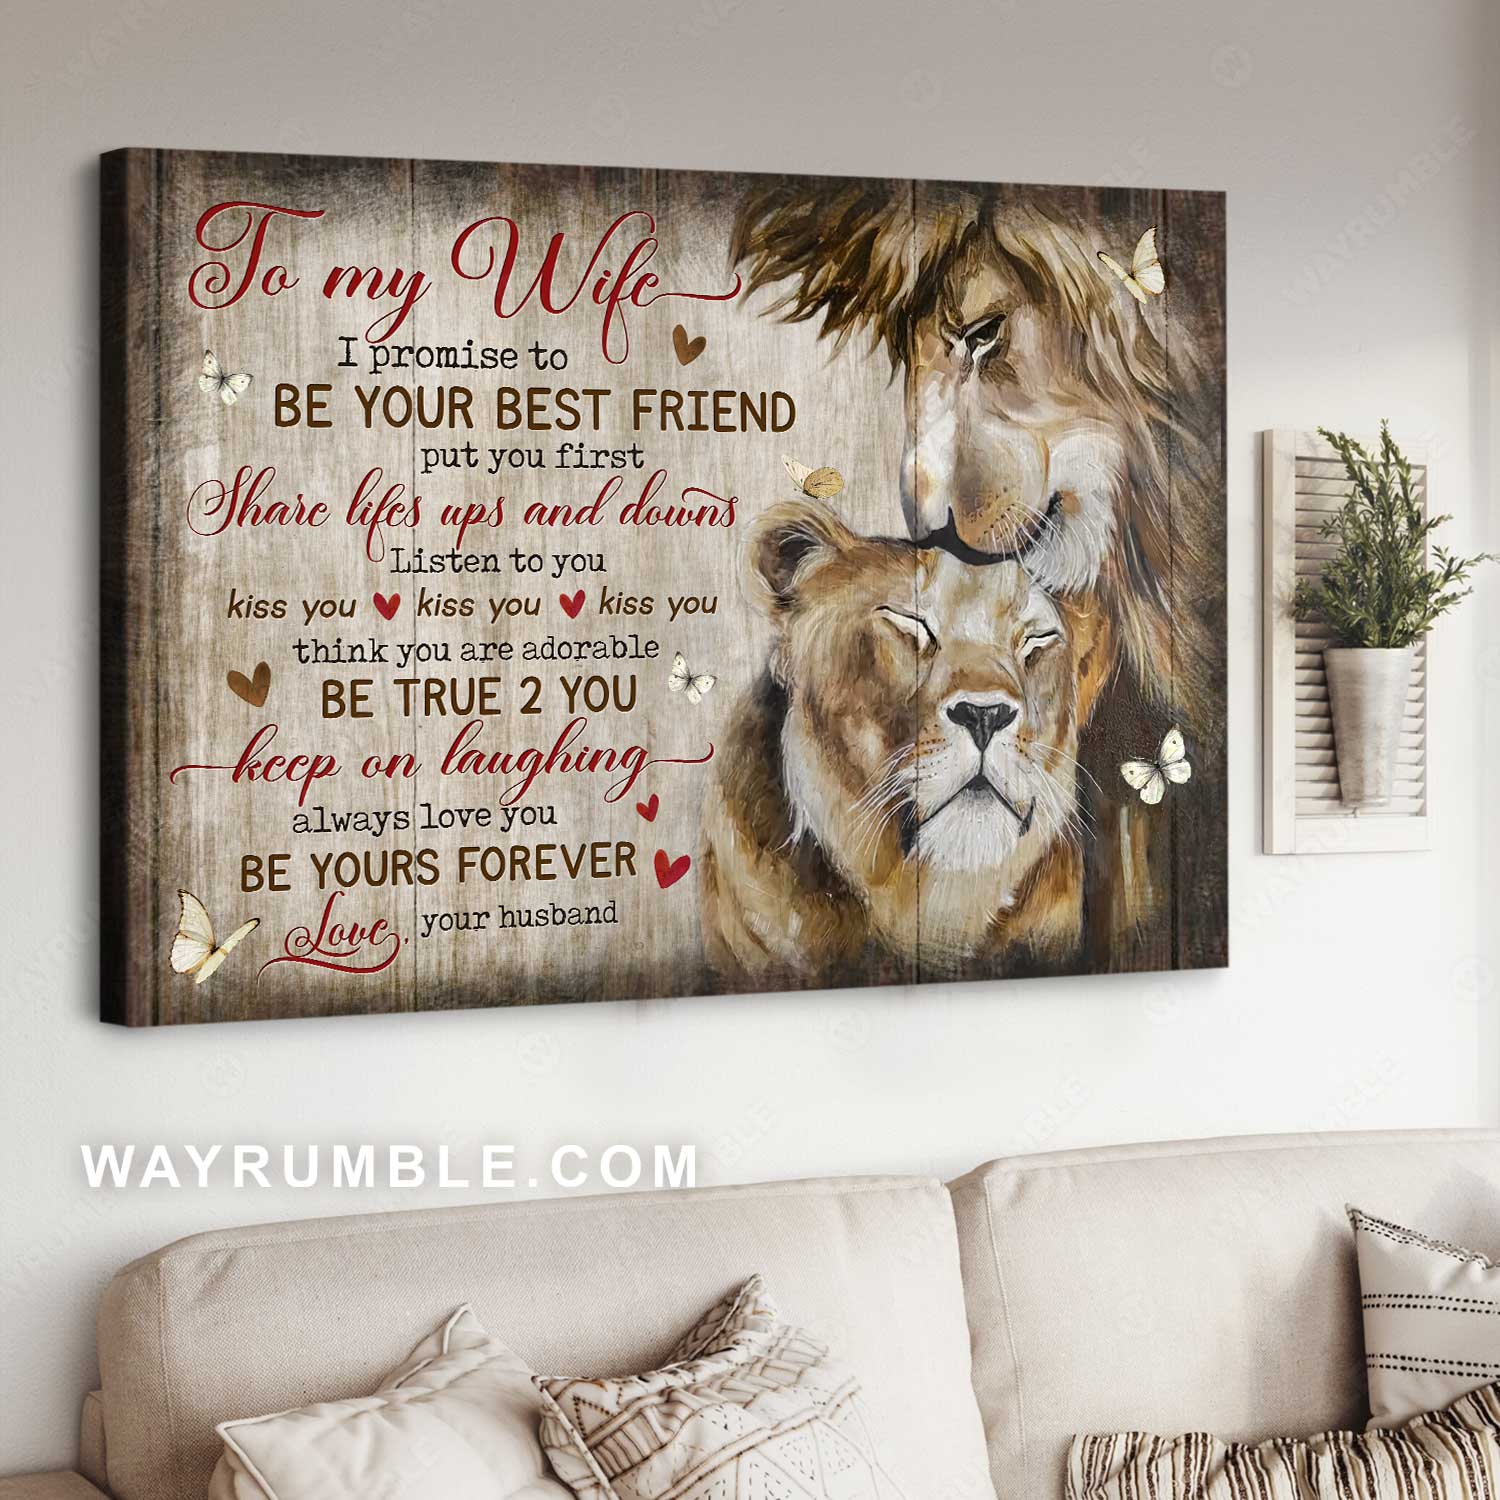 To my wife, Sweet painting, Lion drawing, I promise to be your best friend - Family Landscape Canvas Prints, Wall Art